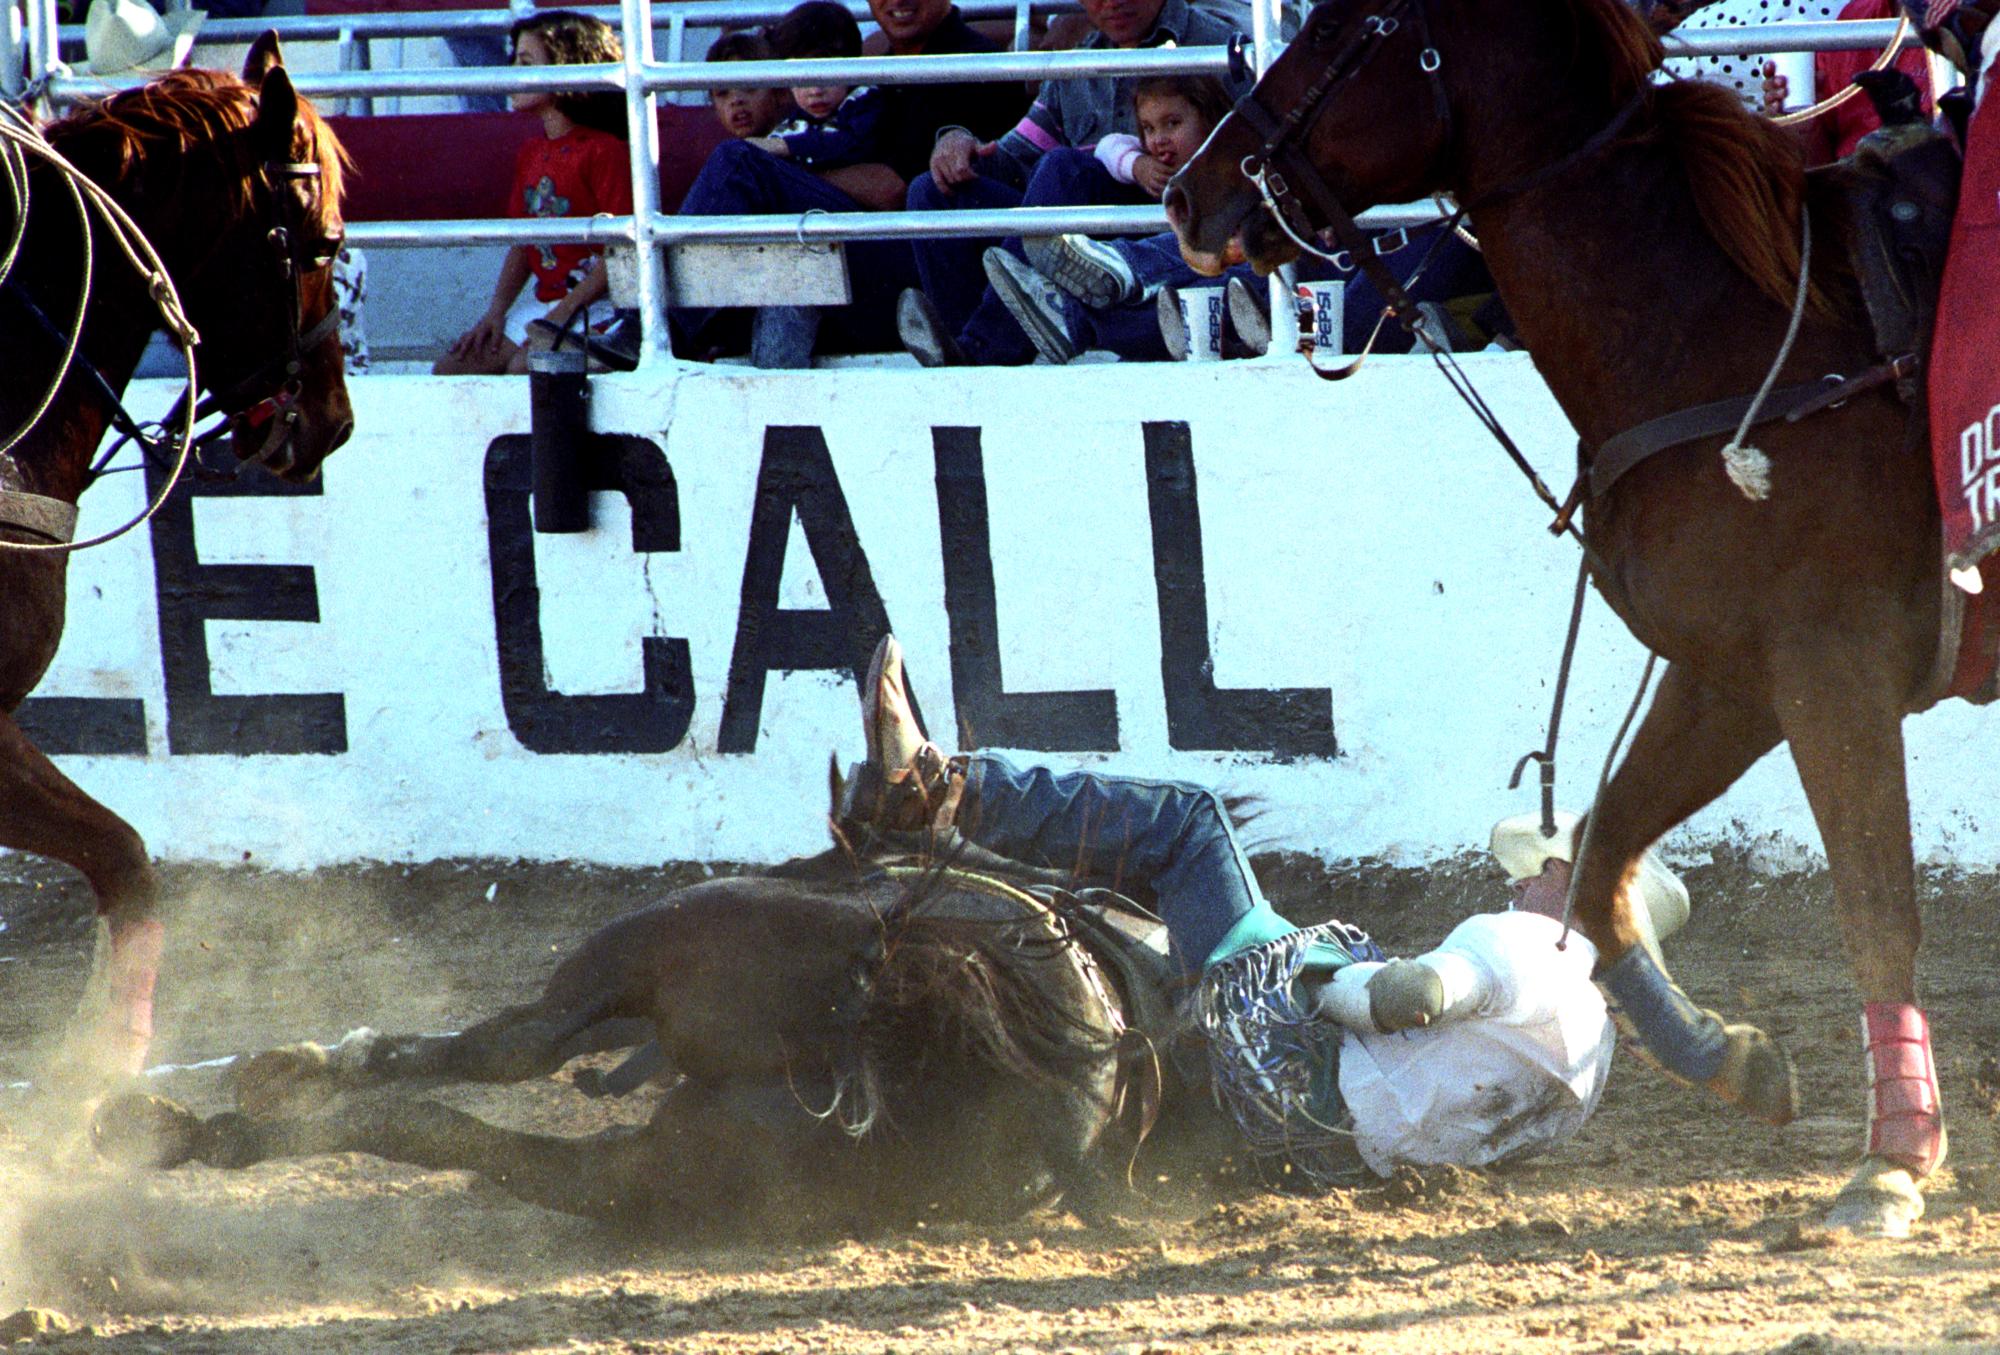 Imperial Valley Rodeo (1992) - Tough Hombre #4